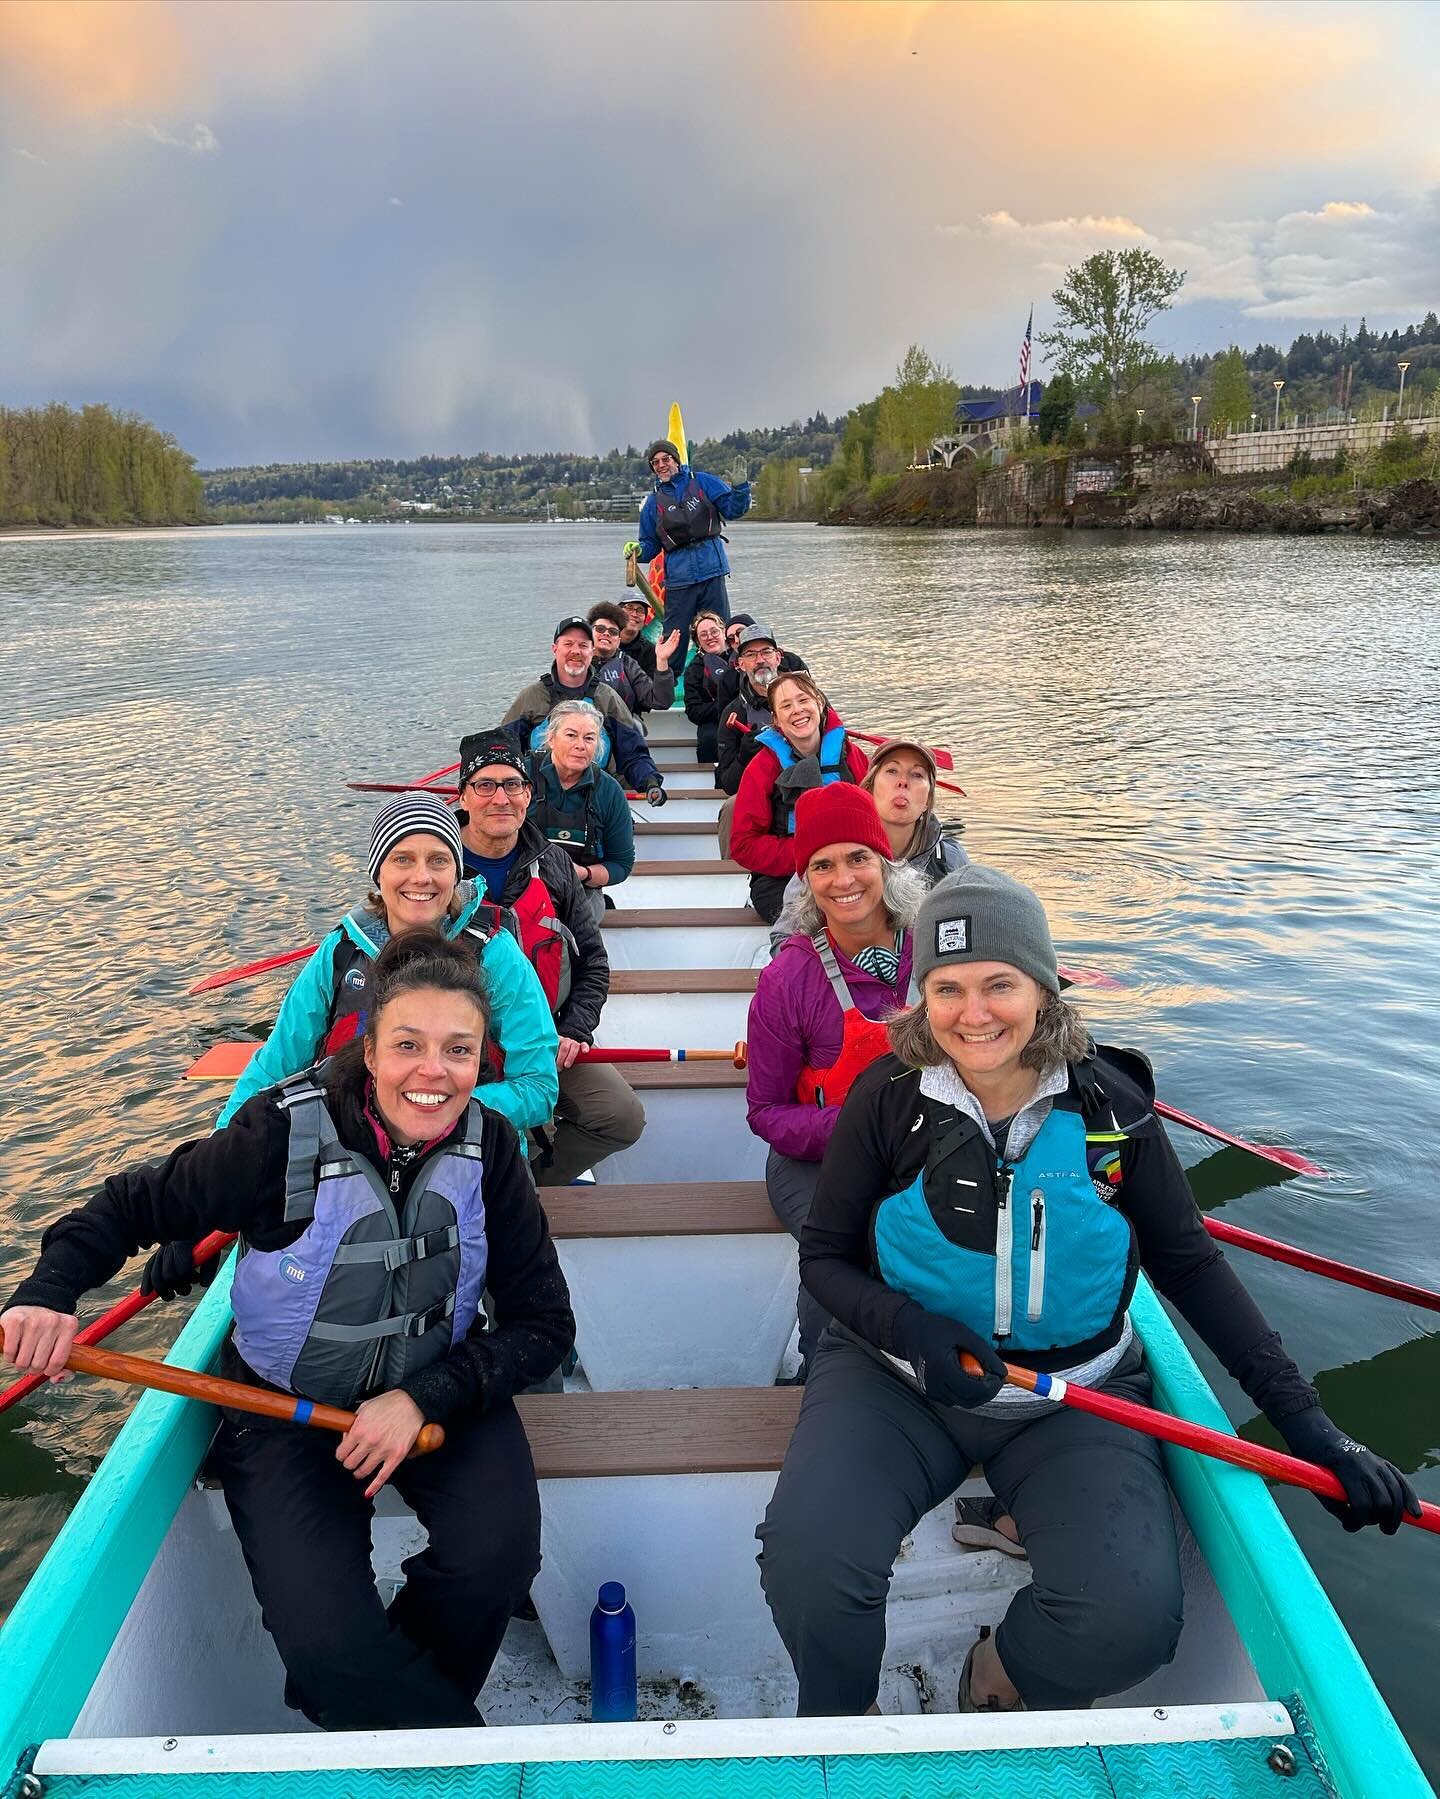 Dragon boat! Some fun photos of my fab team out on the river, in the marina, and one of our fab coaches @merri.whipps sitting up front. We practice at 7 pm, the evening skies are so pretty, and thus far no rain! Last night we saw a huge sea lion cavo